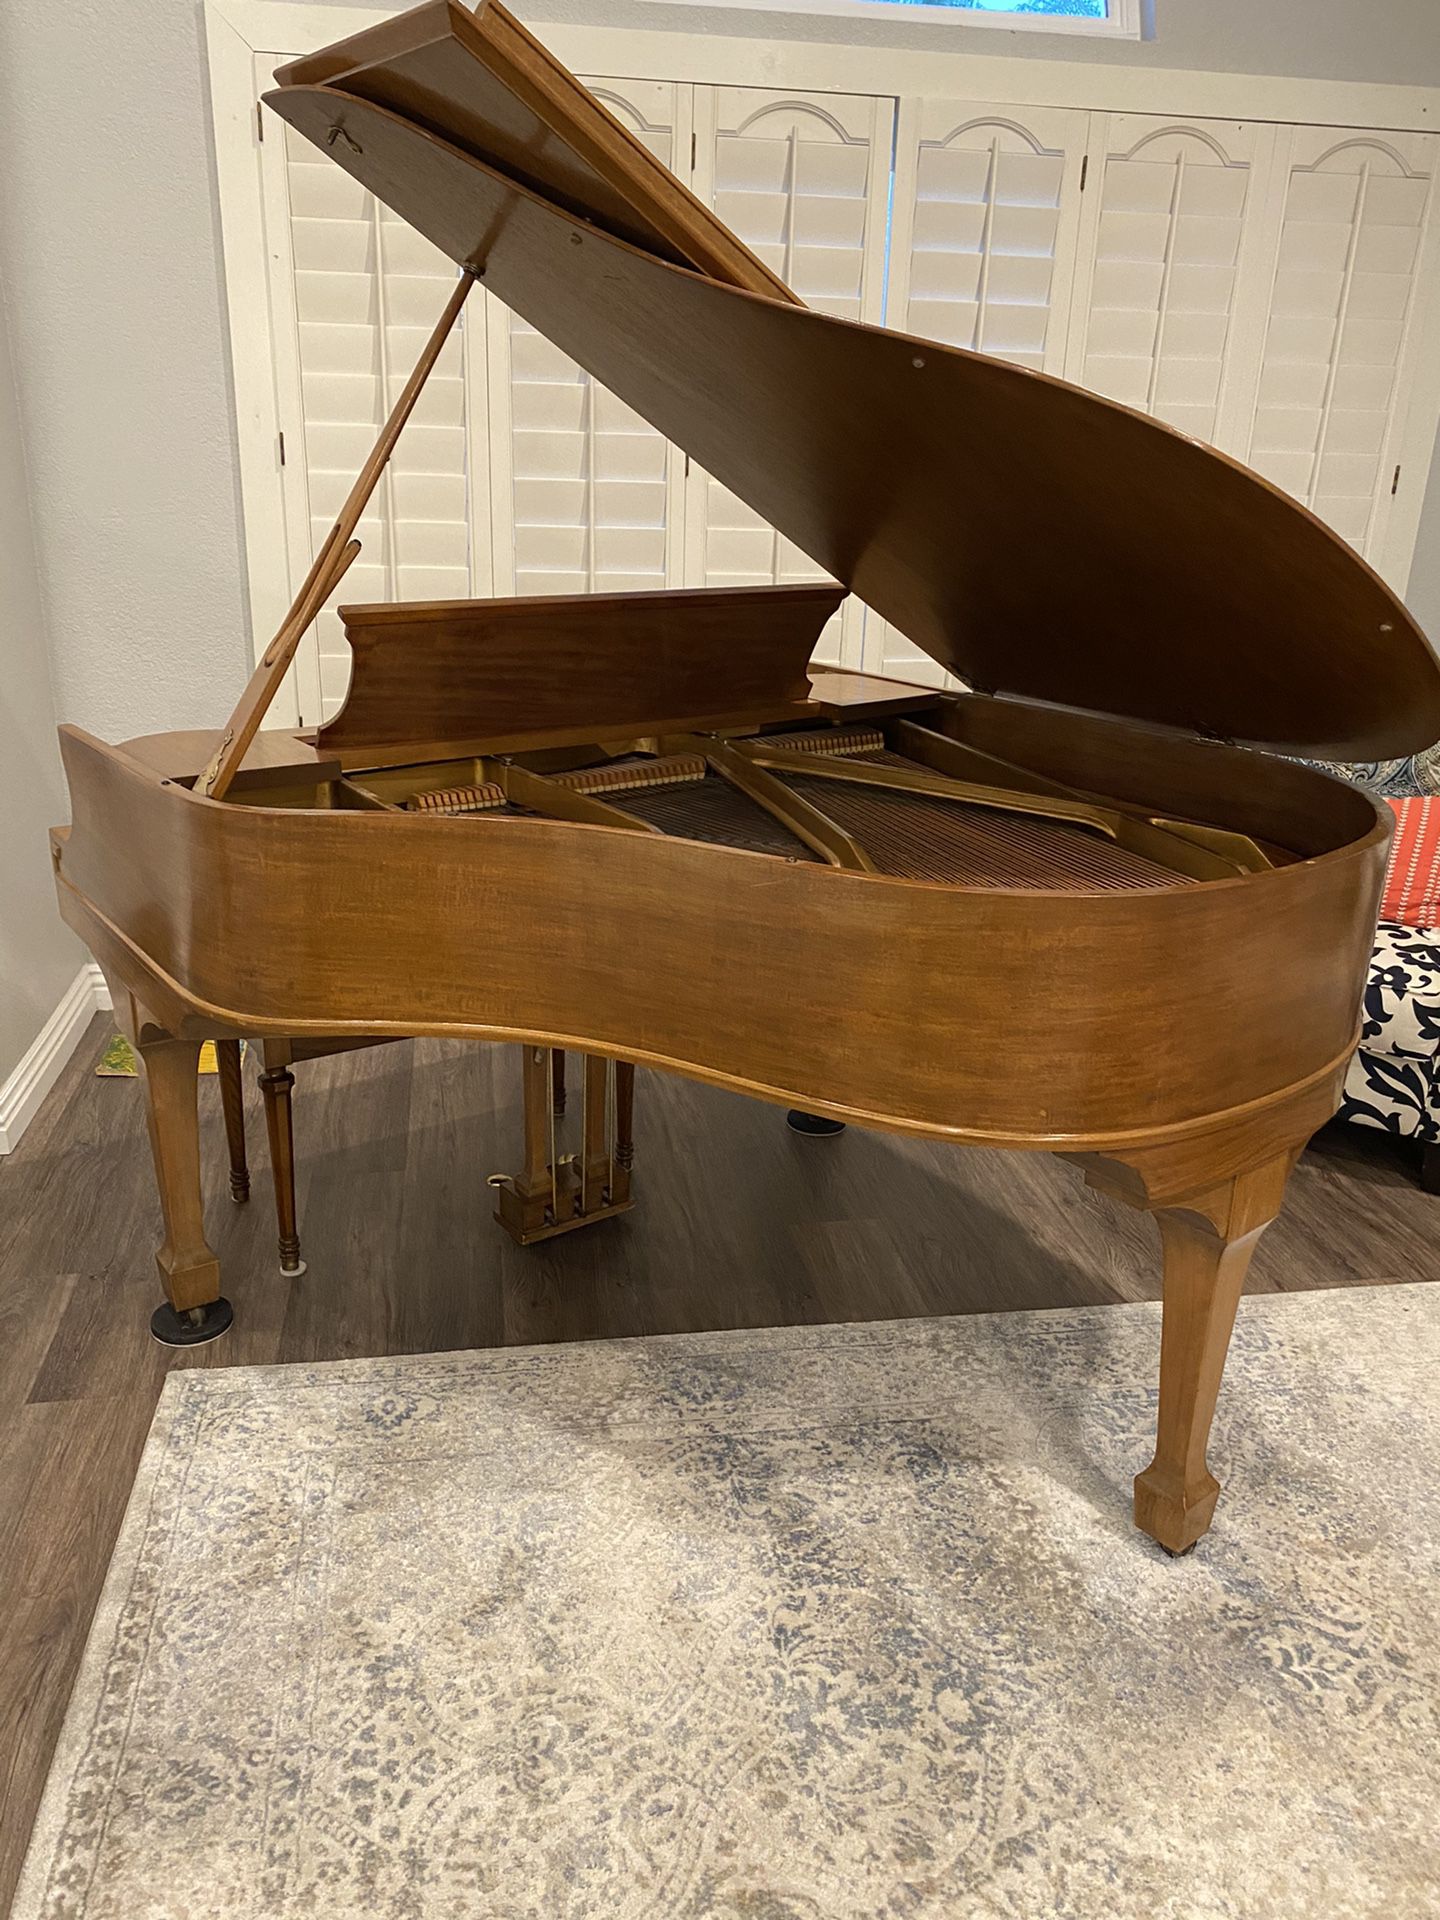 Make an Offer!!!! Kranich and Bach 1920s piano $1000 or best offer